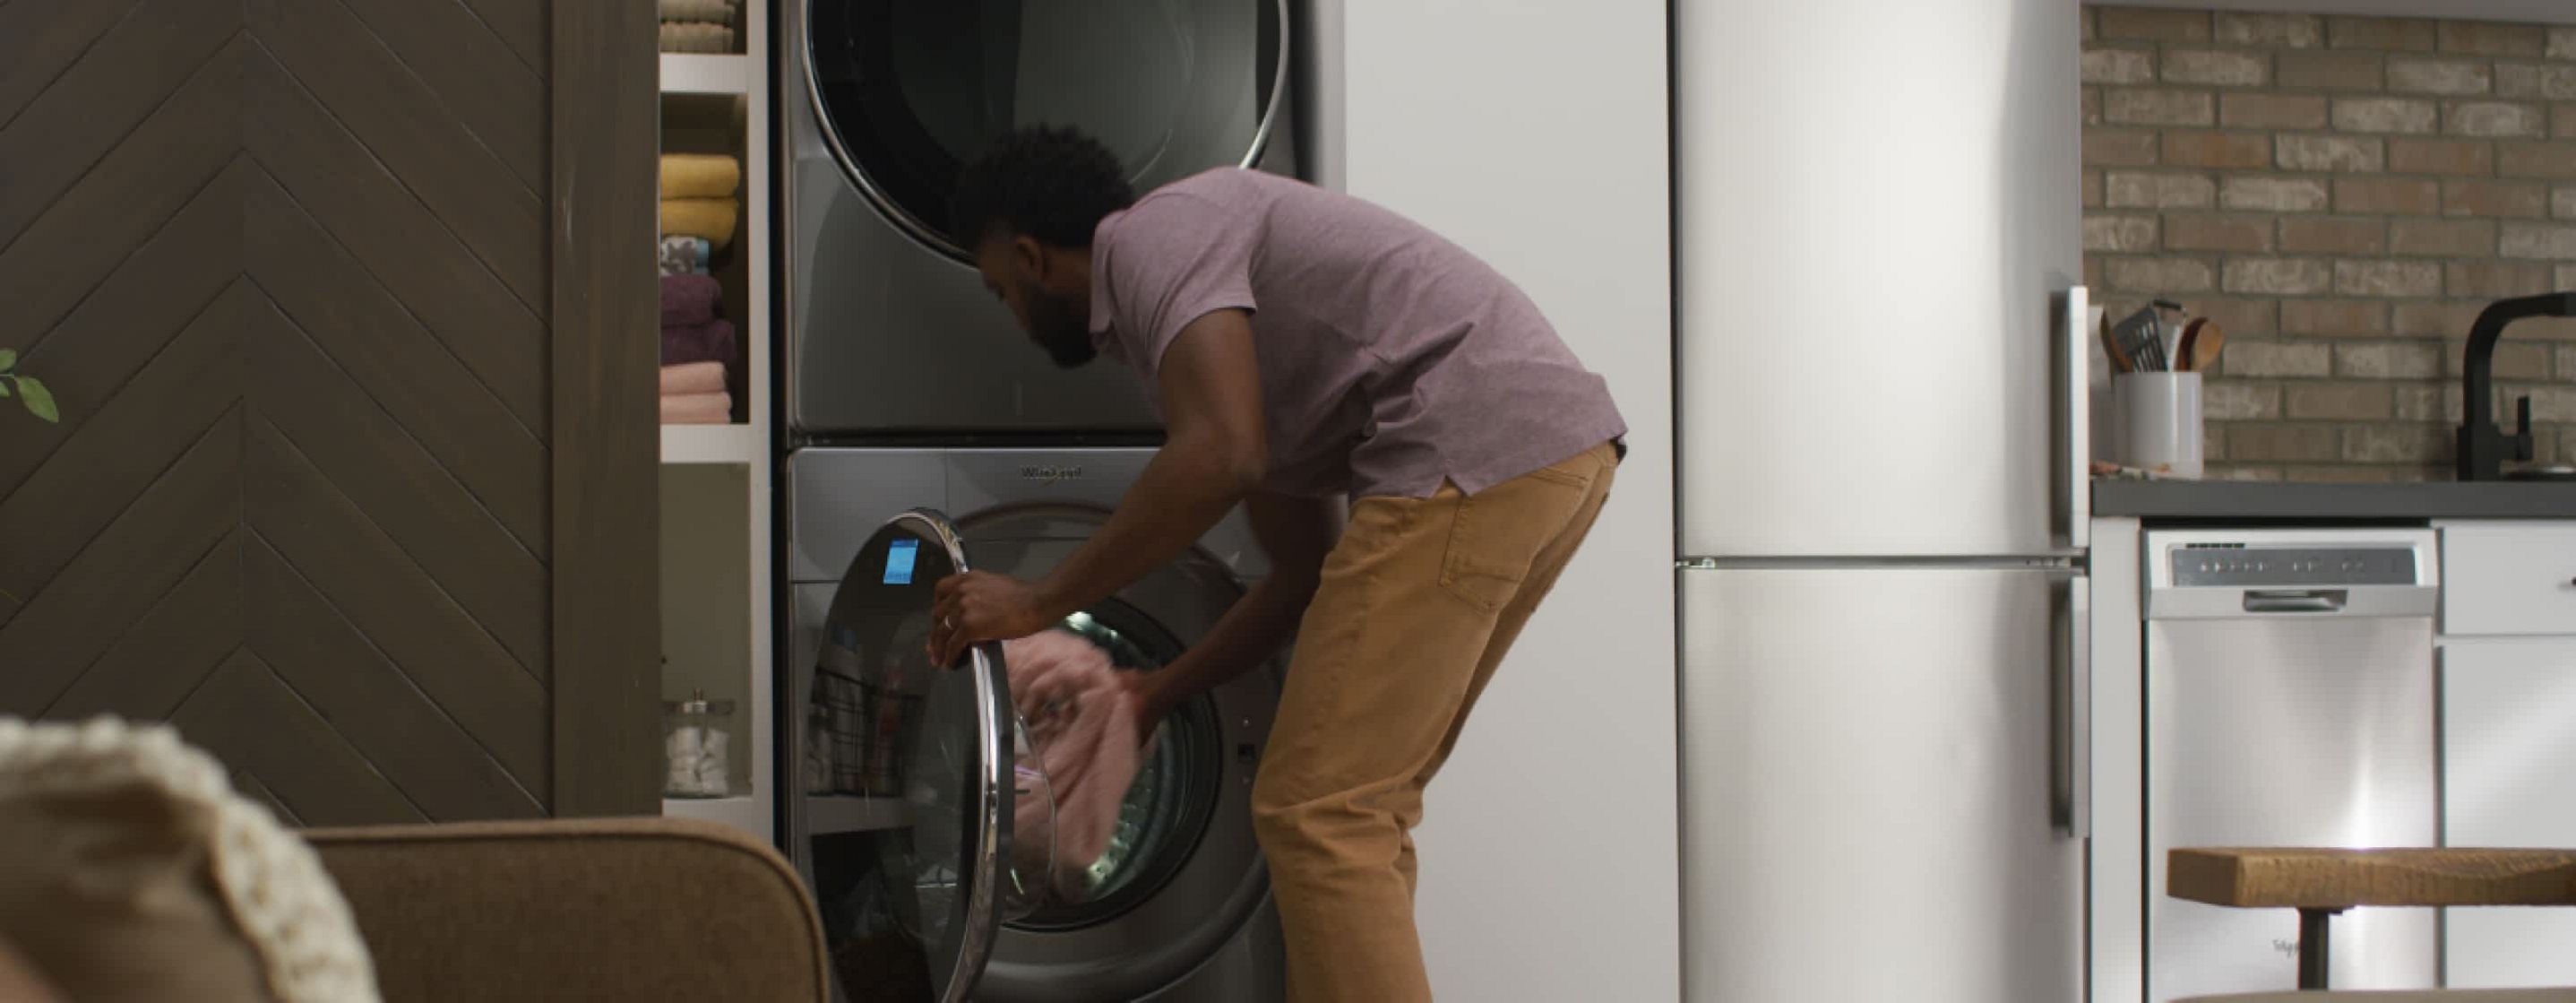 A man loads laundry into a Whirlpool® Stacked Washer & Dryer